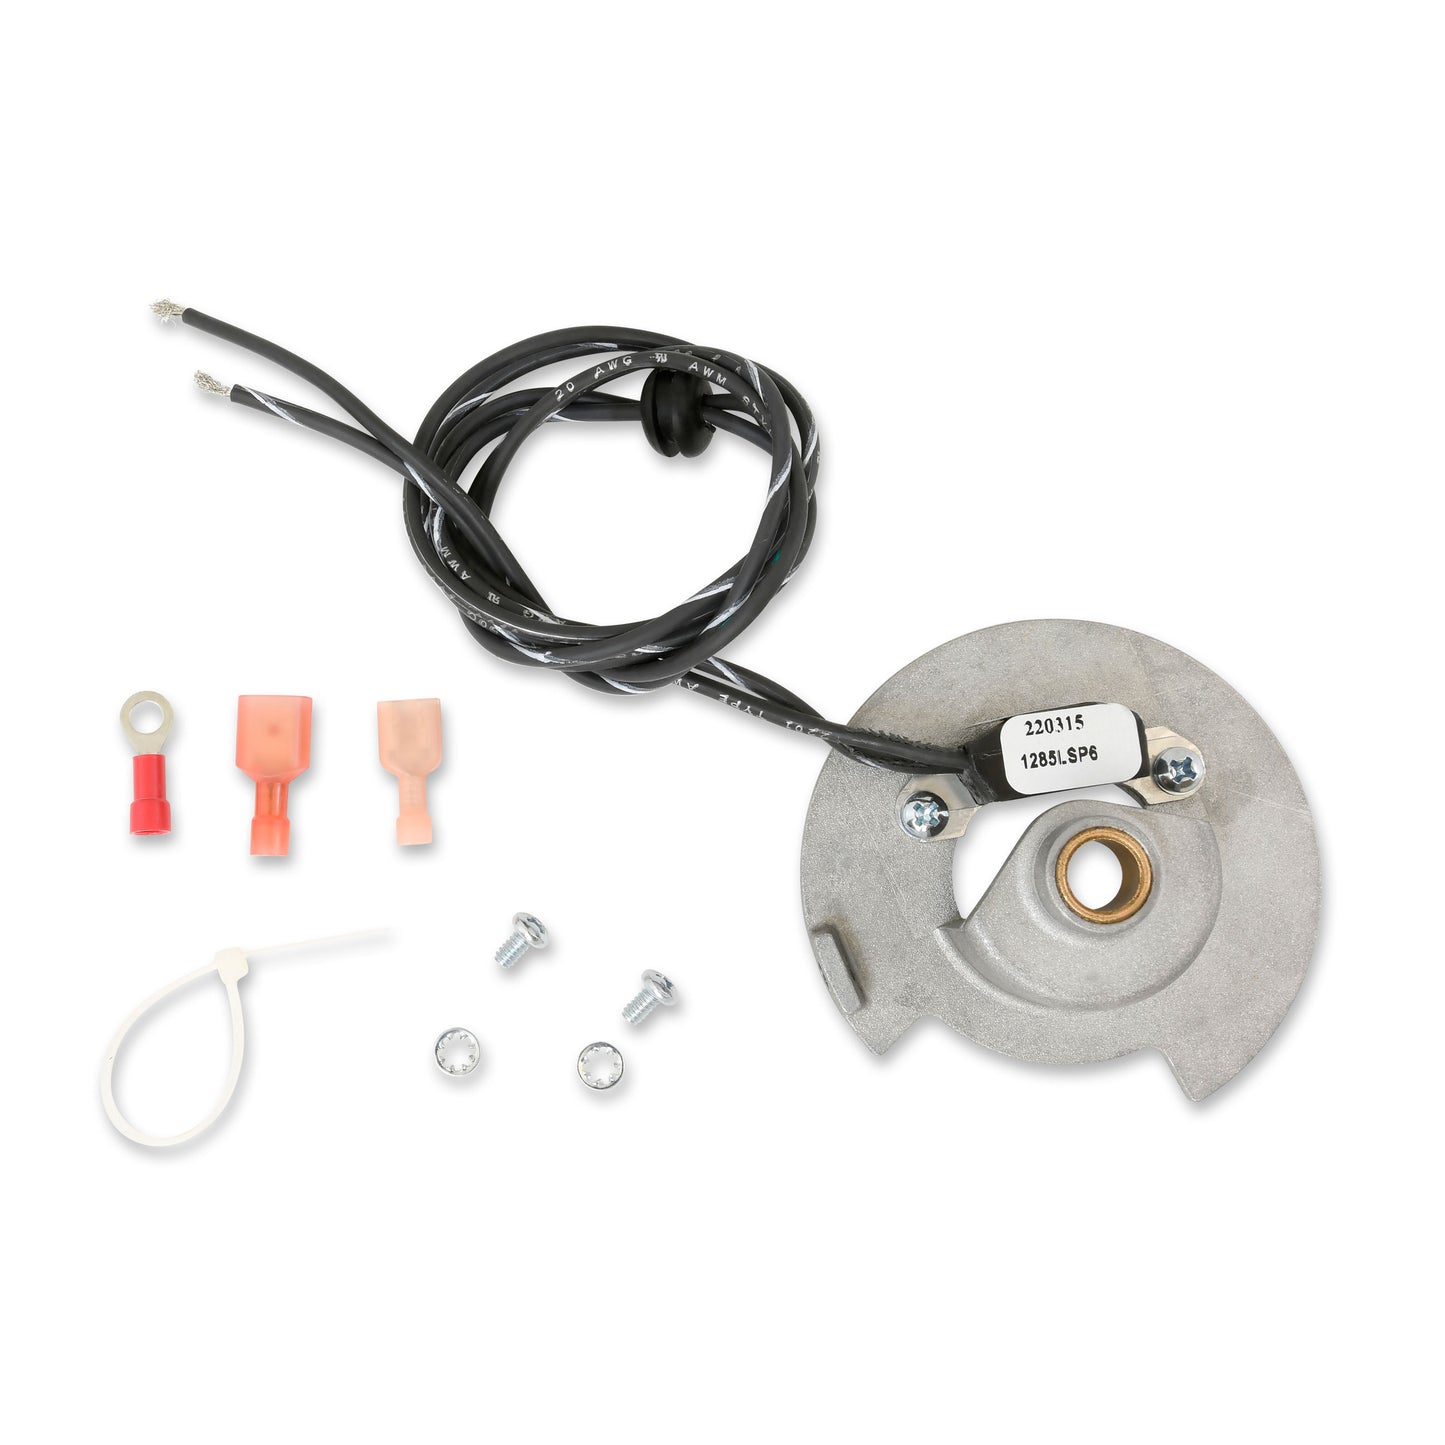 PerTronix Ignitor Electronic Ignition Conversion Kit-1285LSP6
